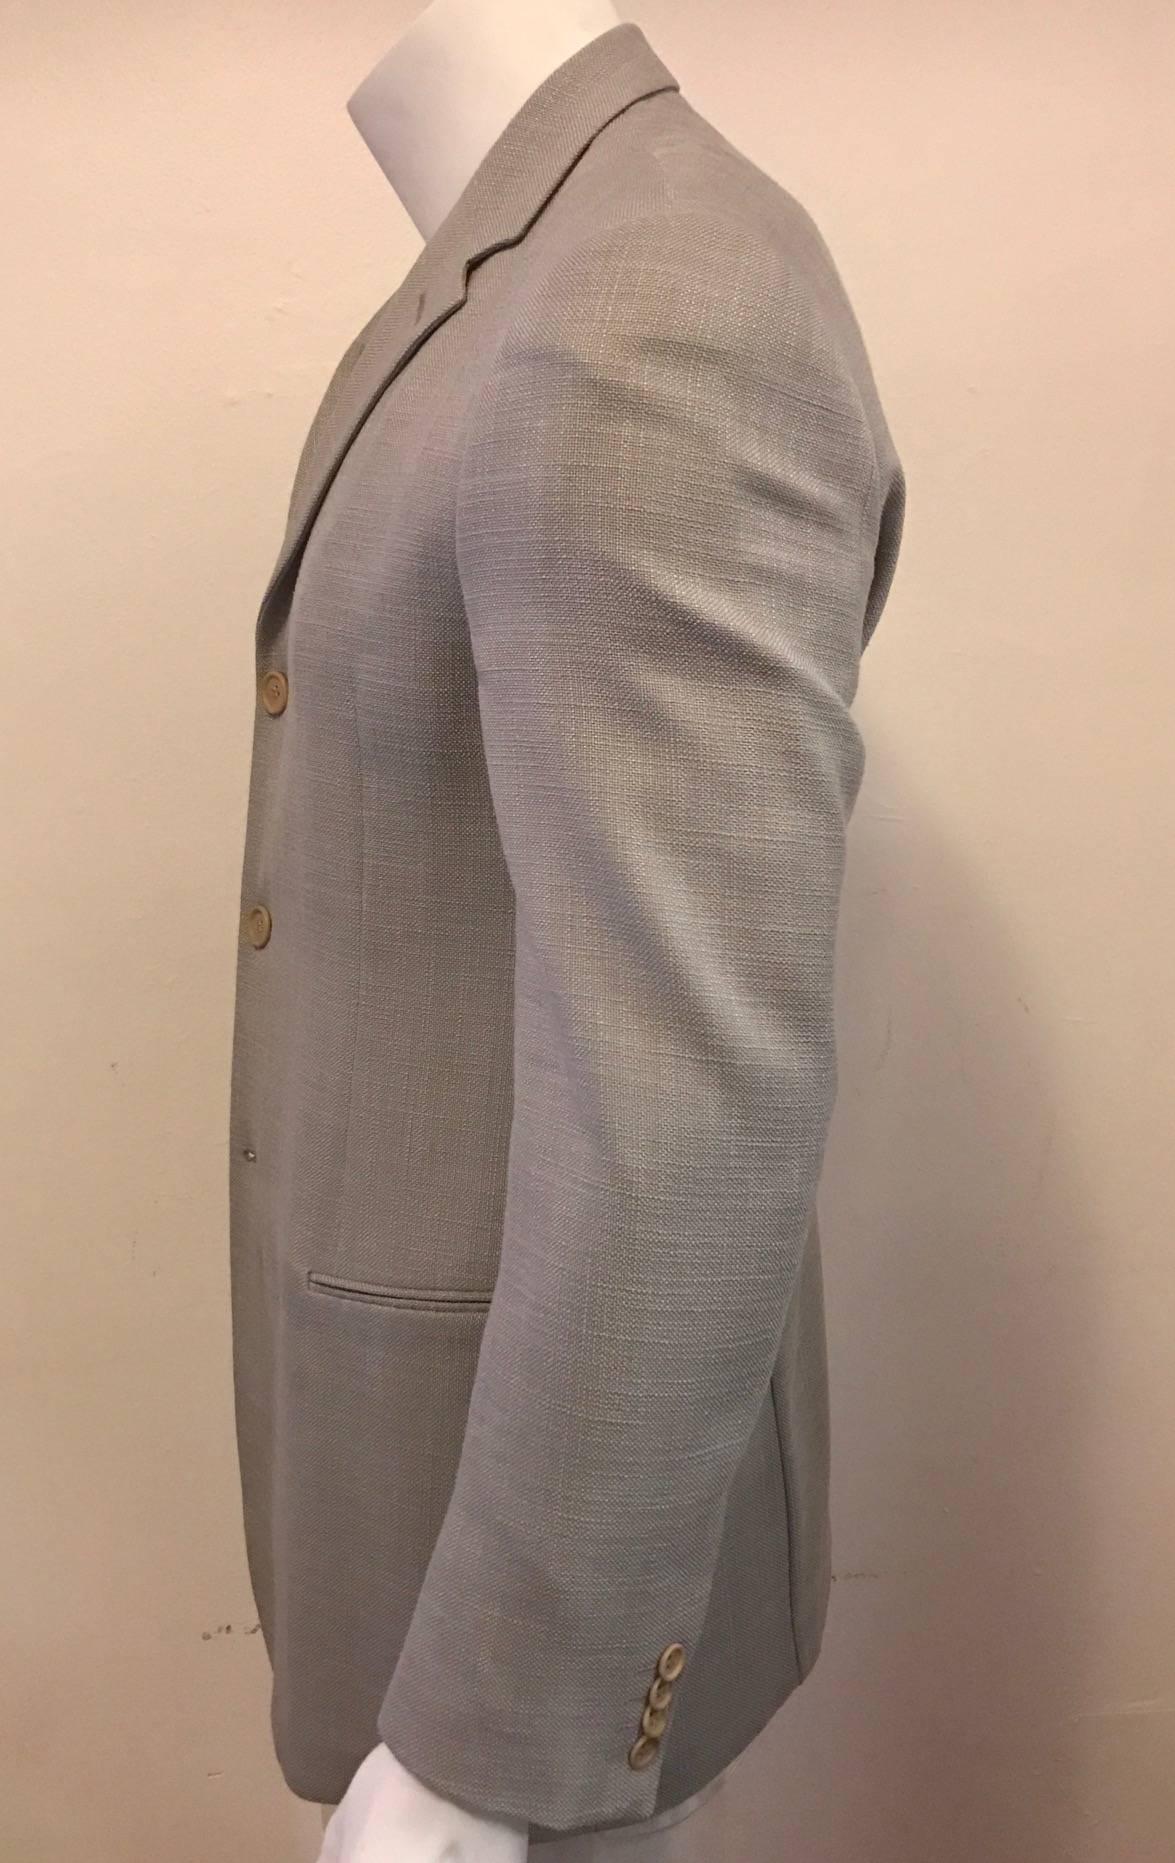 Men's Giorgio Armani Black Label unconstructed long line sport coat in 80% silk and 20% cotton.  Small shoulder pads, bemberg, and lined sleeves.  Three button closure, two slit front pockets that have not been untacked.  A wonderful lightweight